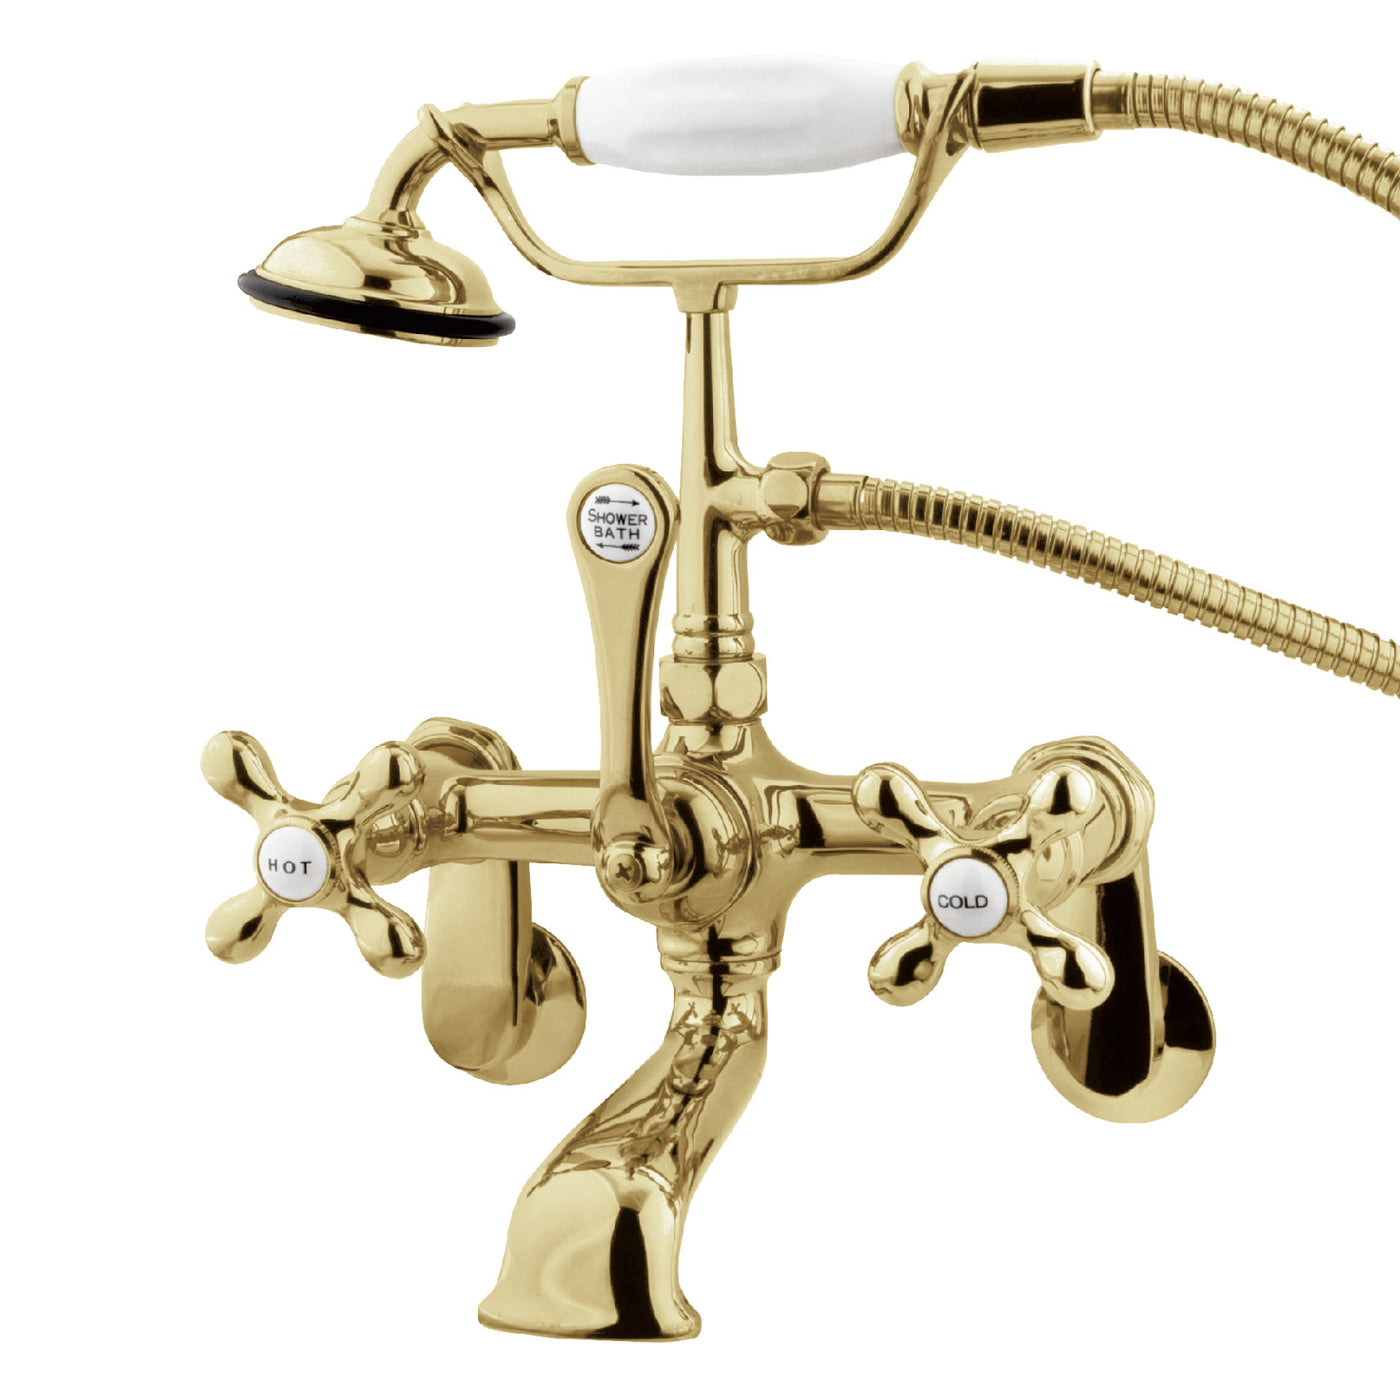 Elements of Design DT0512AX Adjustable Center Wall Mount Tub Faucet, Polished Brass